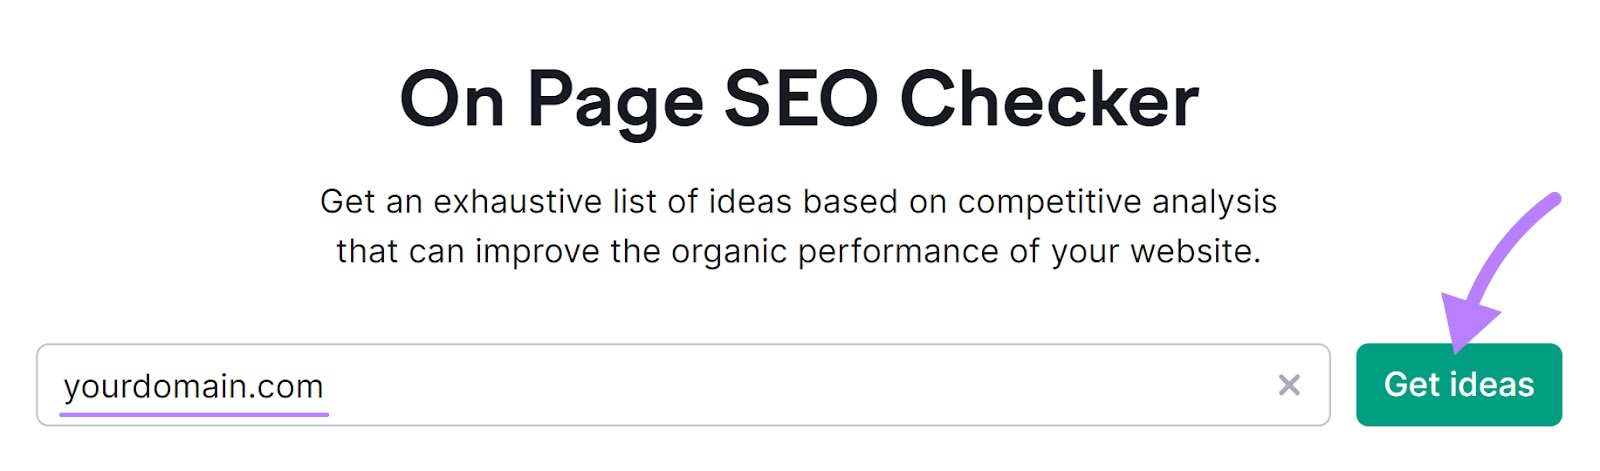 "Get ideas" button in On Page SEO Checker